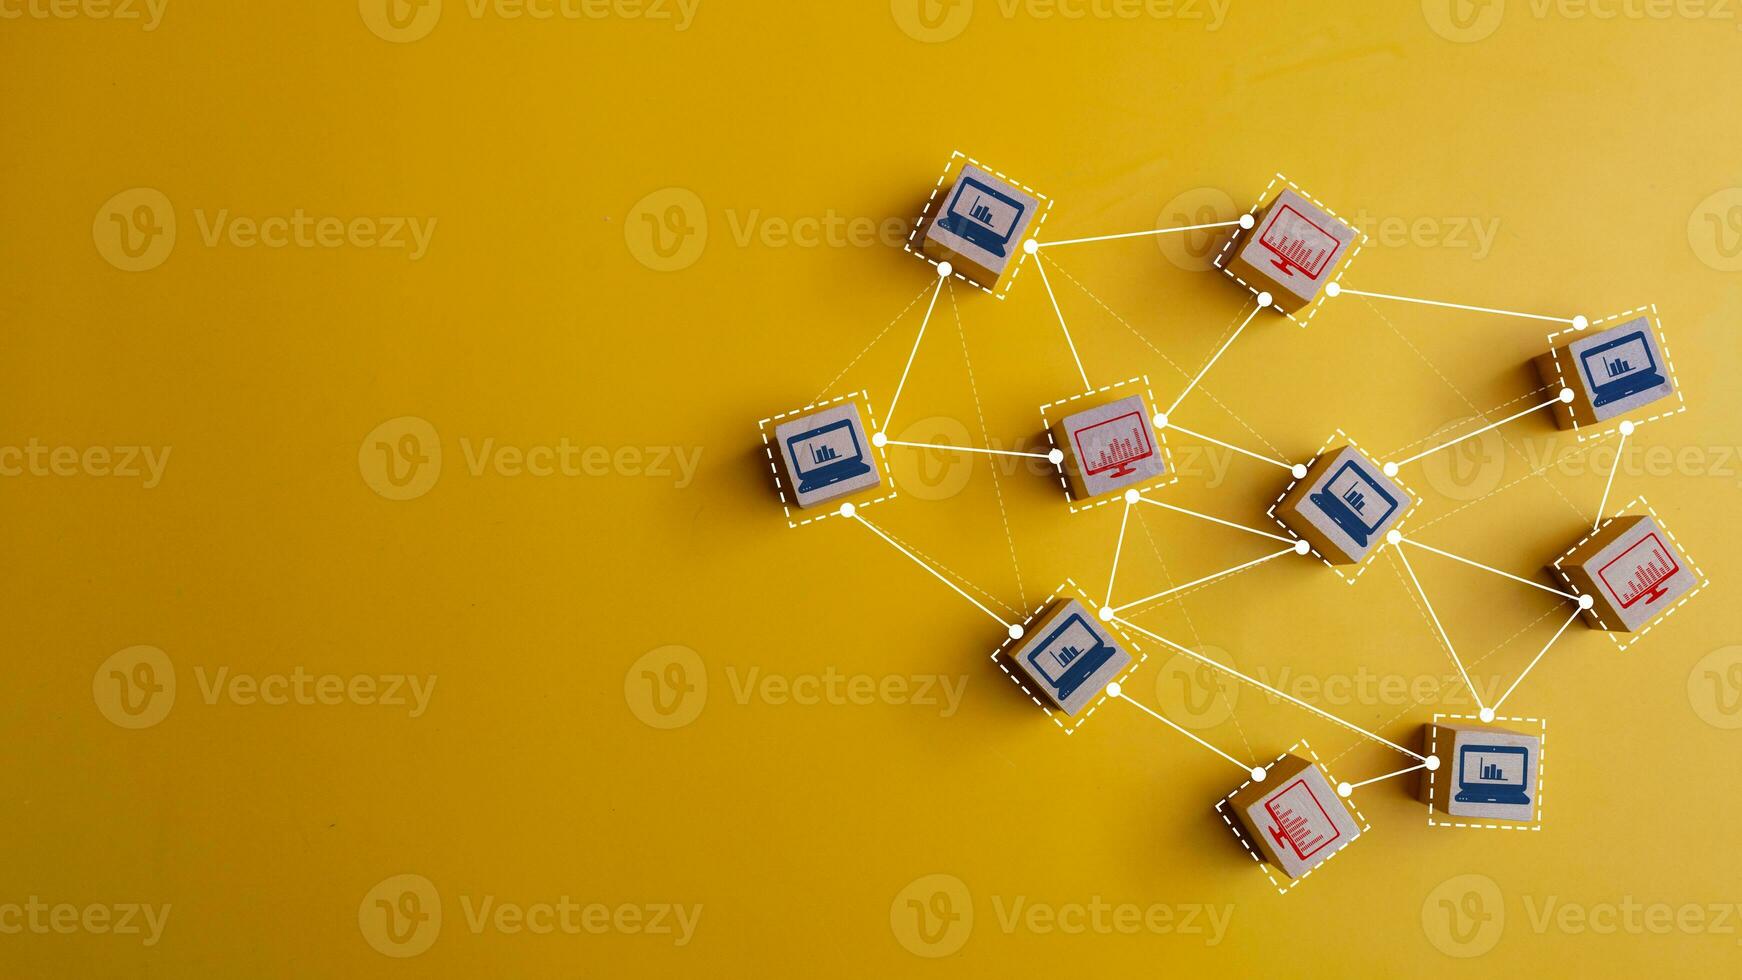 Wooden cubes with computer and laptop icons connected to each other on a network on a yellow background. Concept of computer network or communication. photo